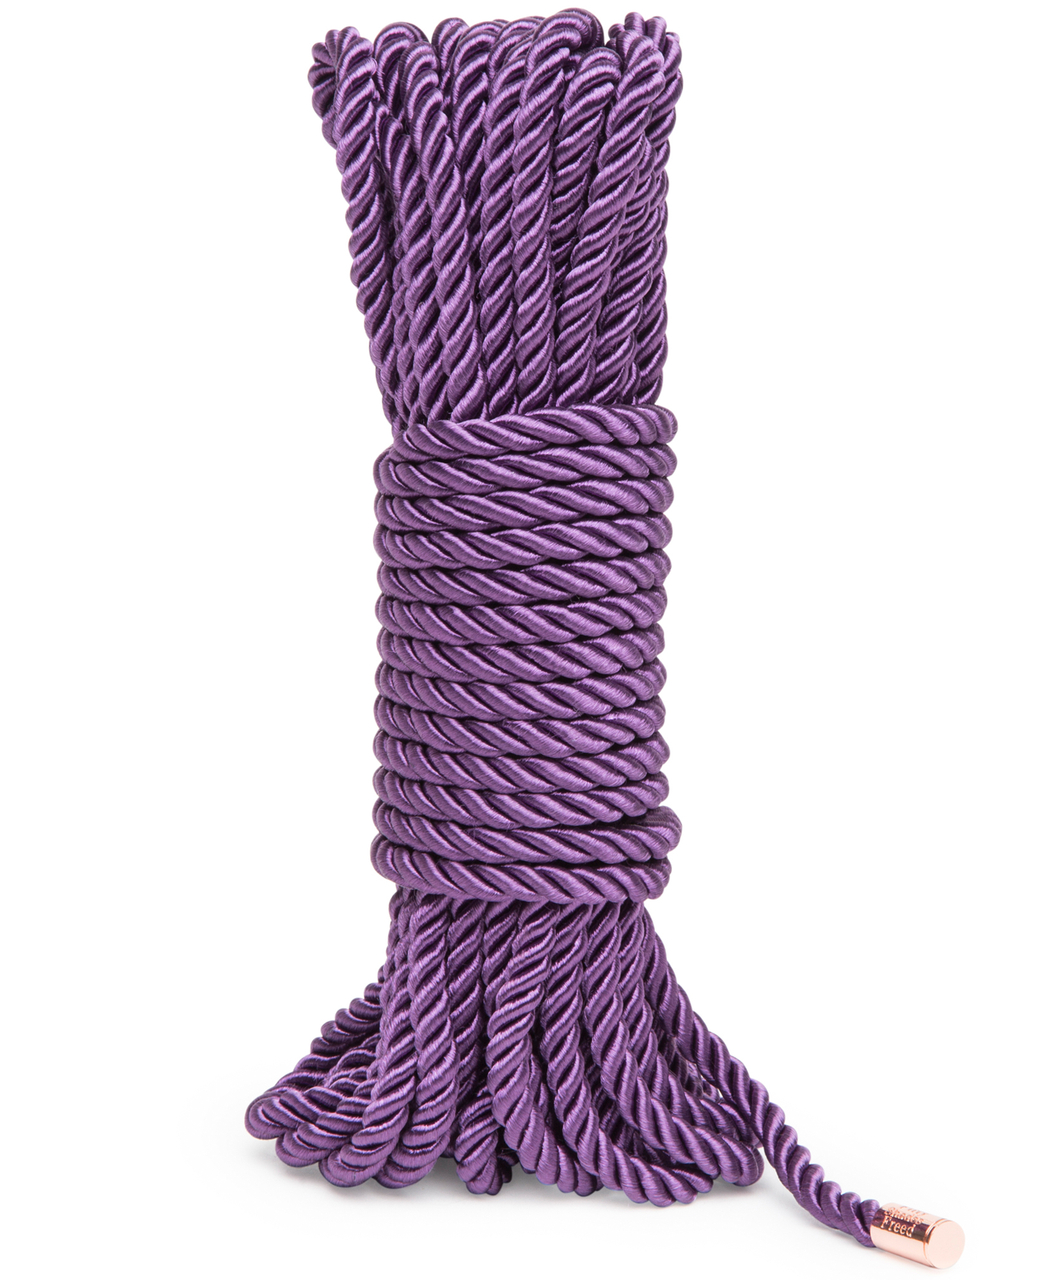 Fifty Shades of Grey Freed Want to Play? Bondage Rope